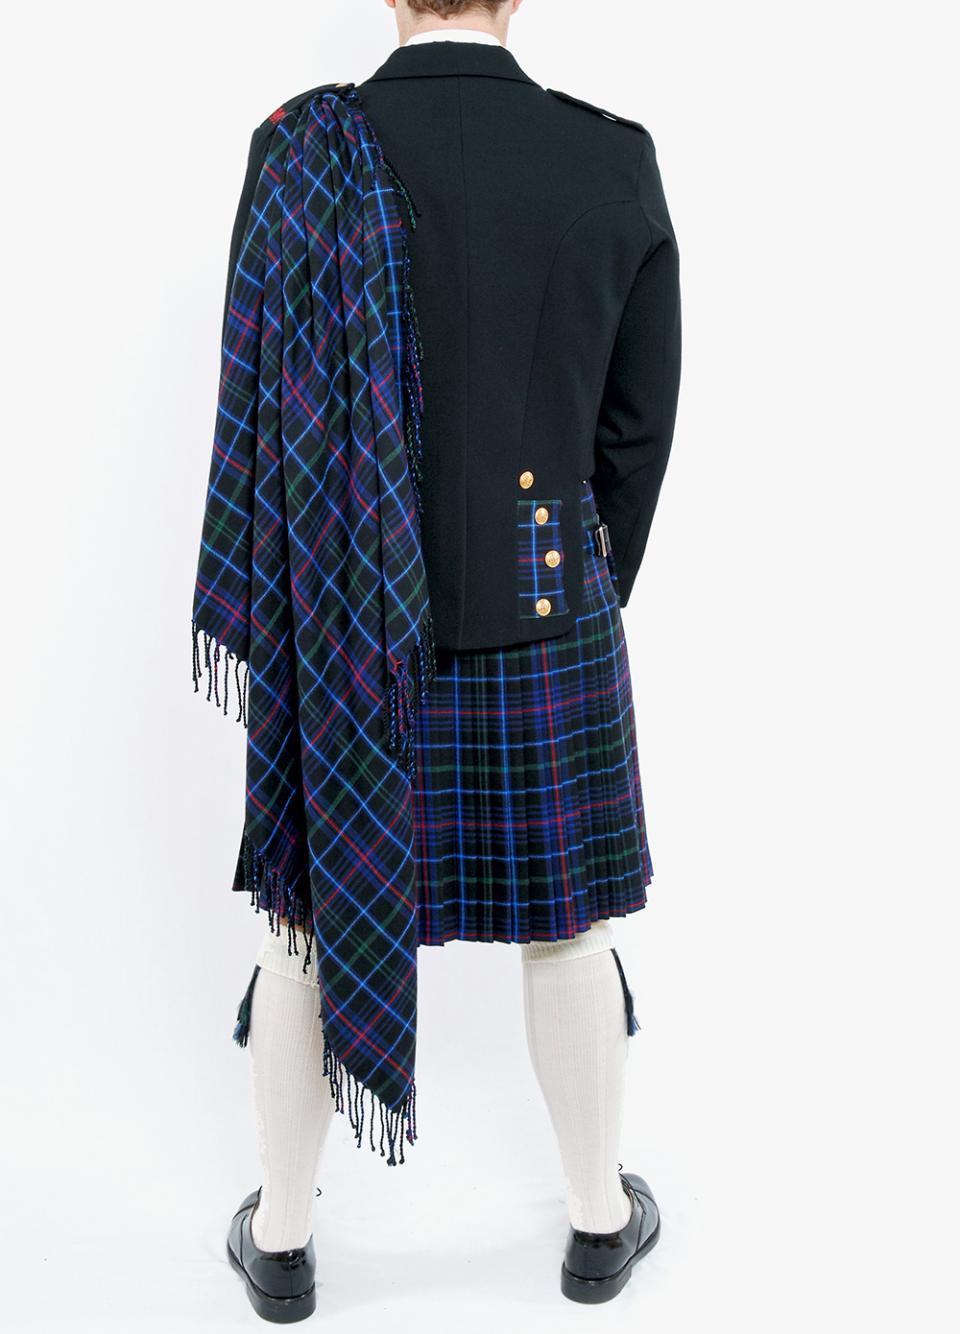 Pride of Wales Kilt Outfit Hire | Wales Tartan Centres